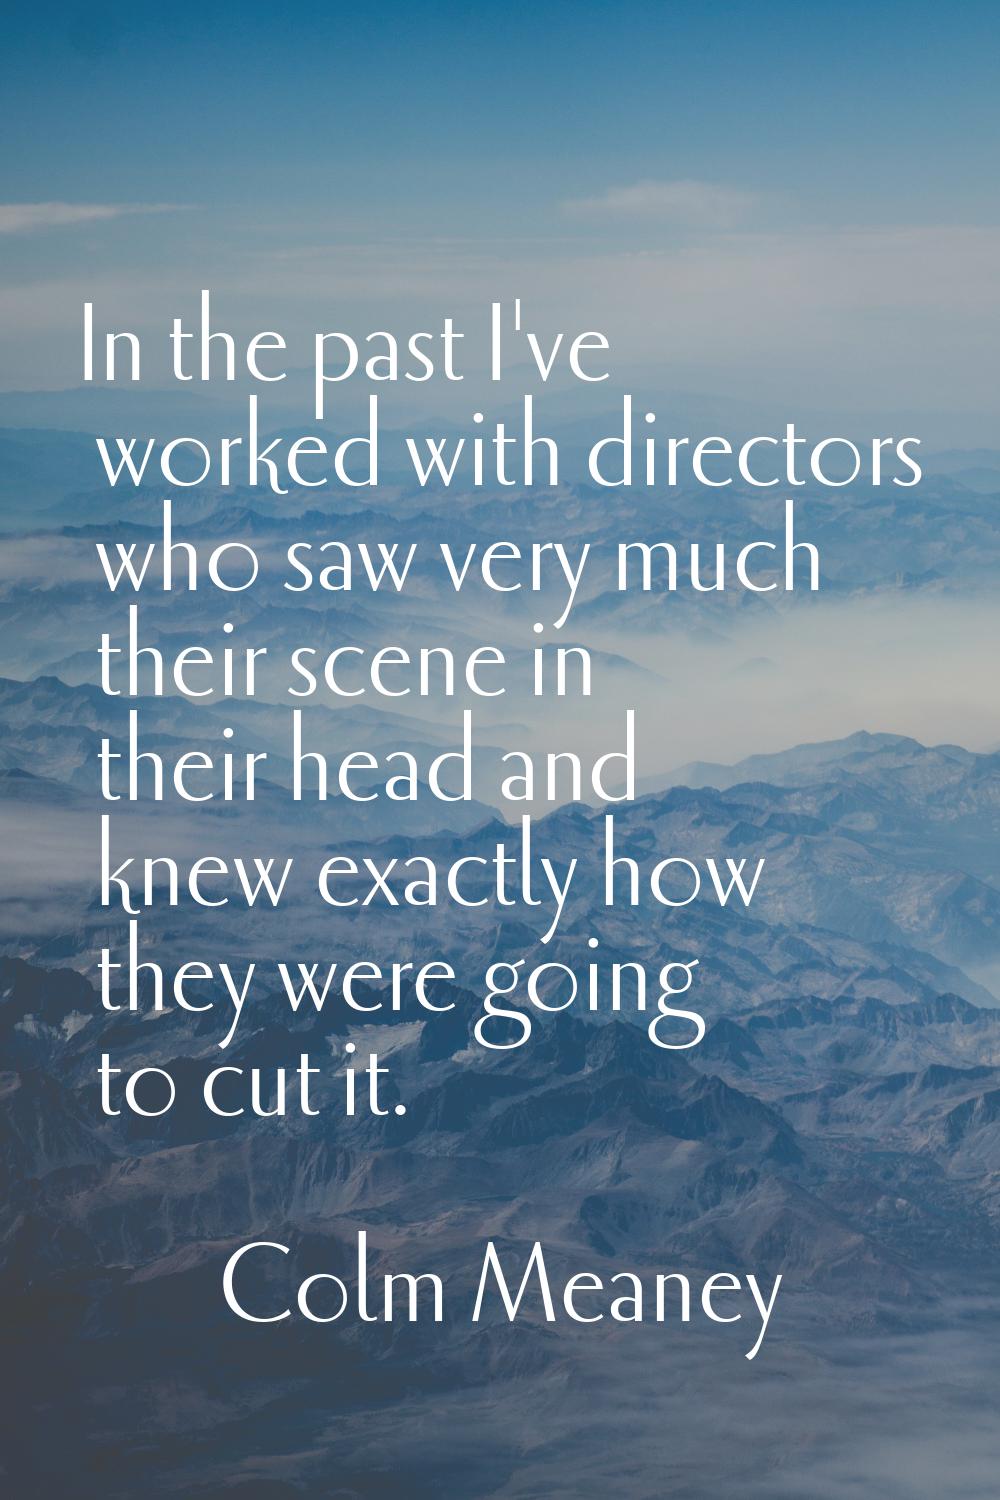 In the past I've worked with directors who saw very much their scene in their head and knew exactly